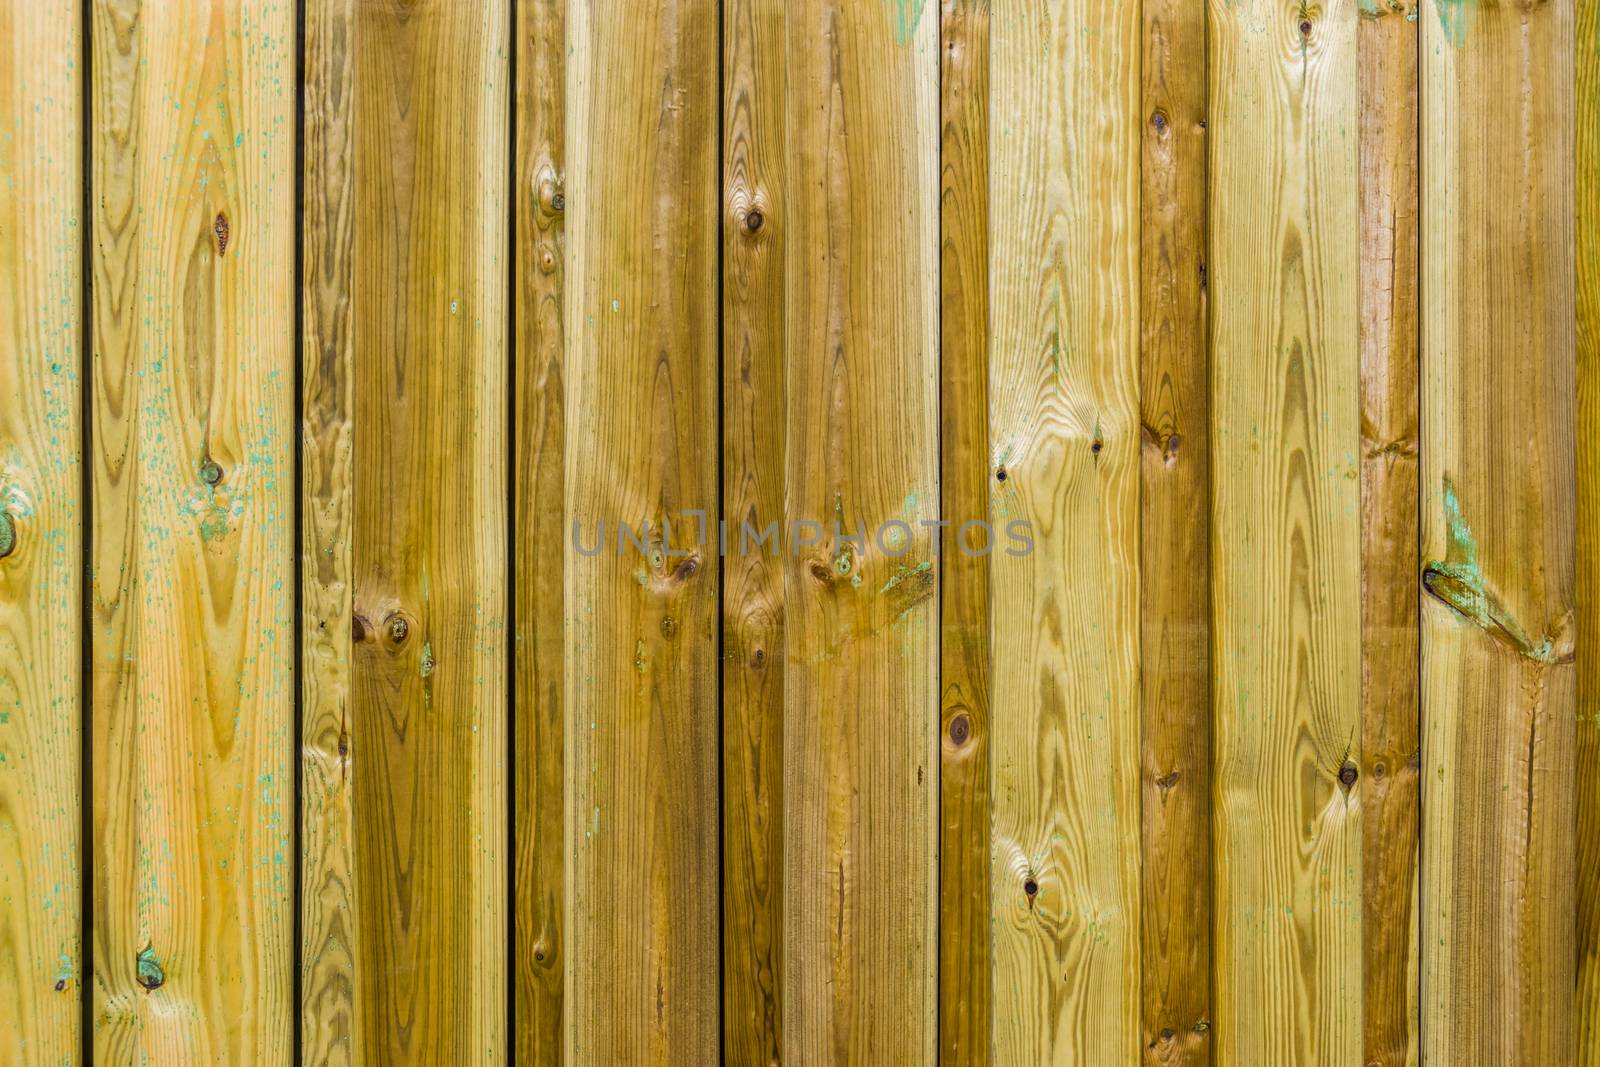 wooden palisade pattern with green mold, wood problems, Garden fence background